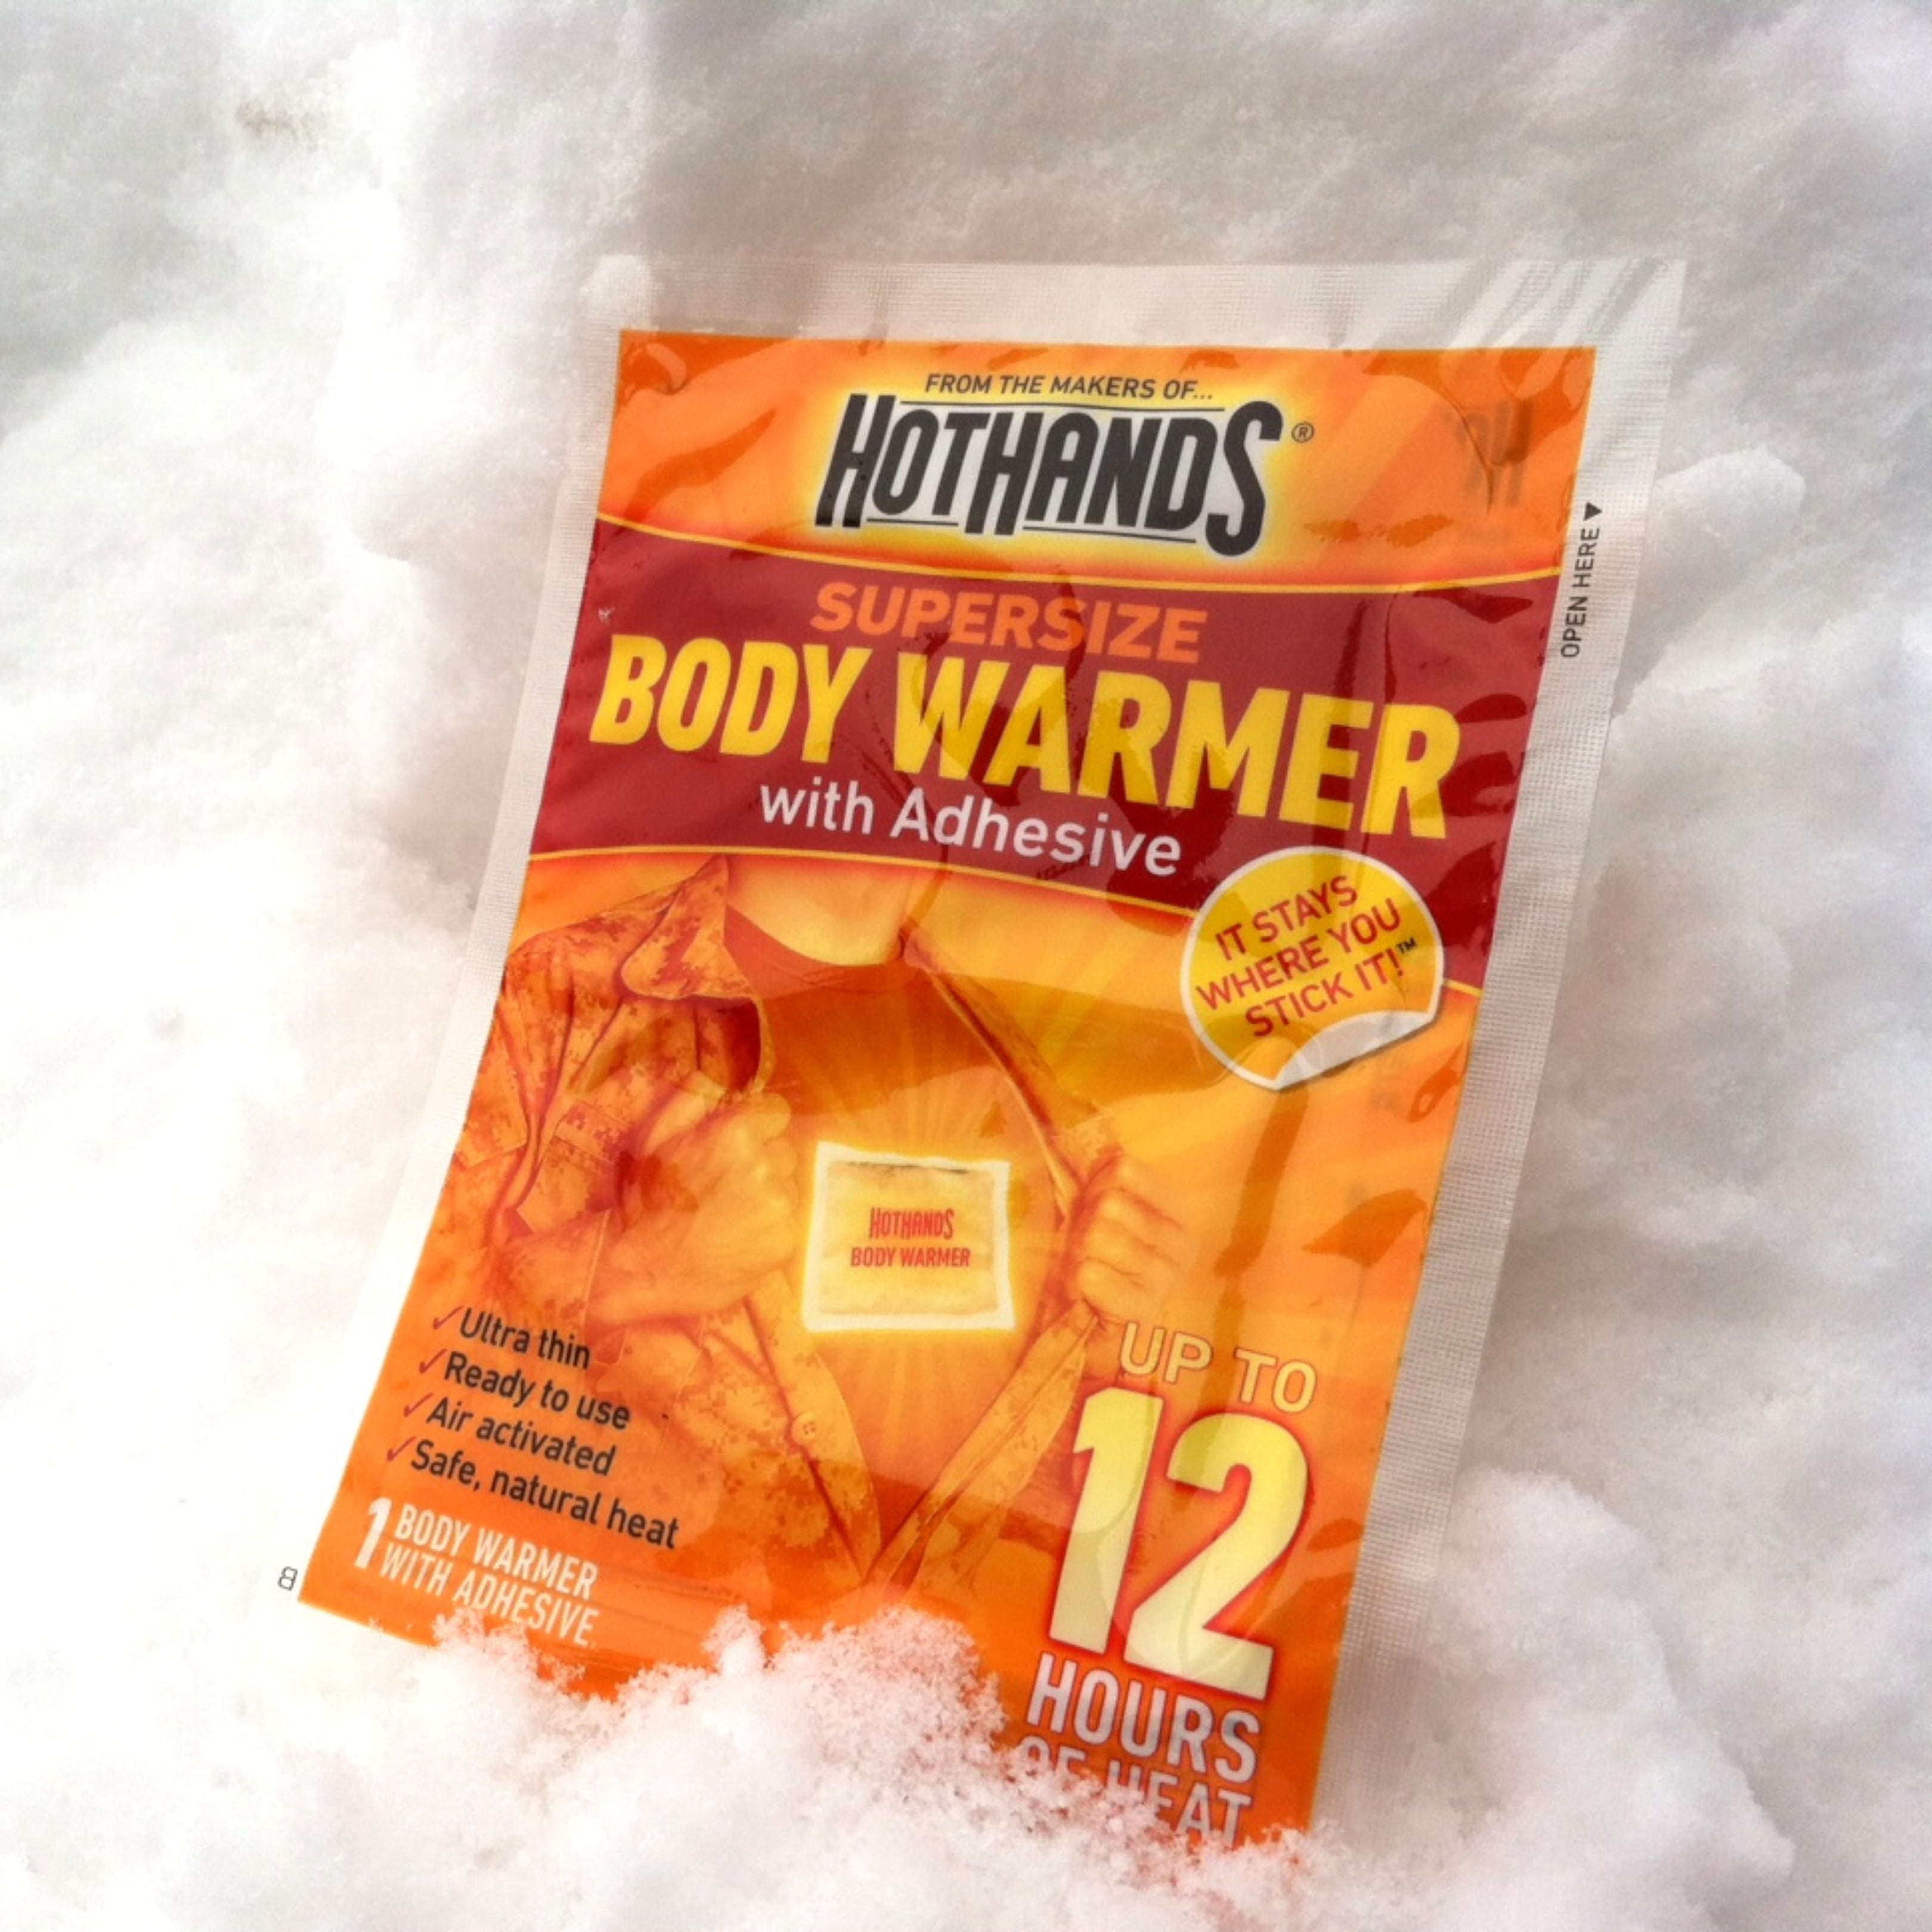 5 Packs Of Hot Hands Body Warmers with Adhesive Up to 12 Hours of Heat 